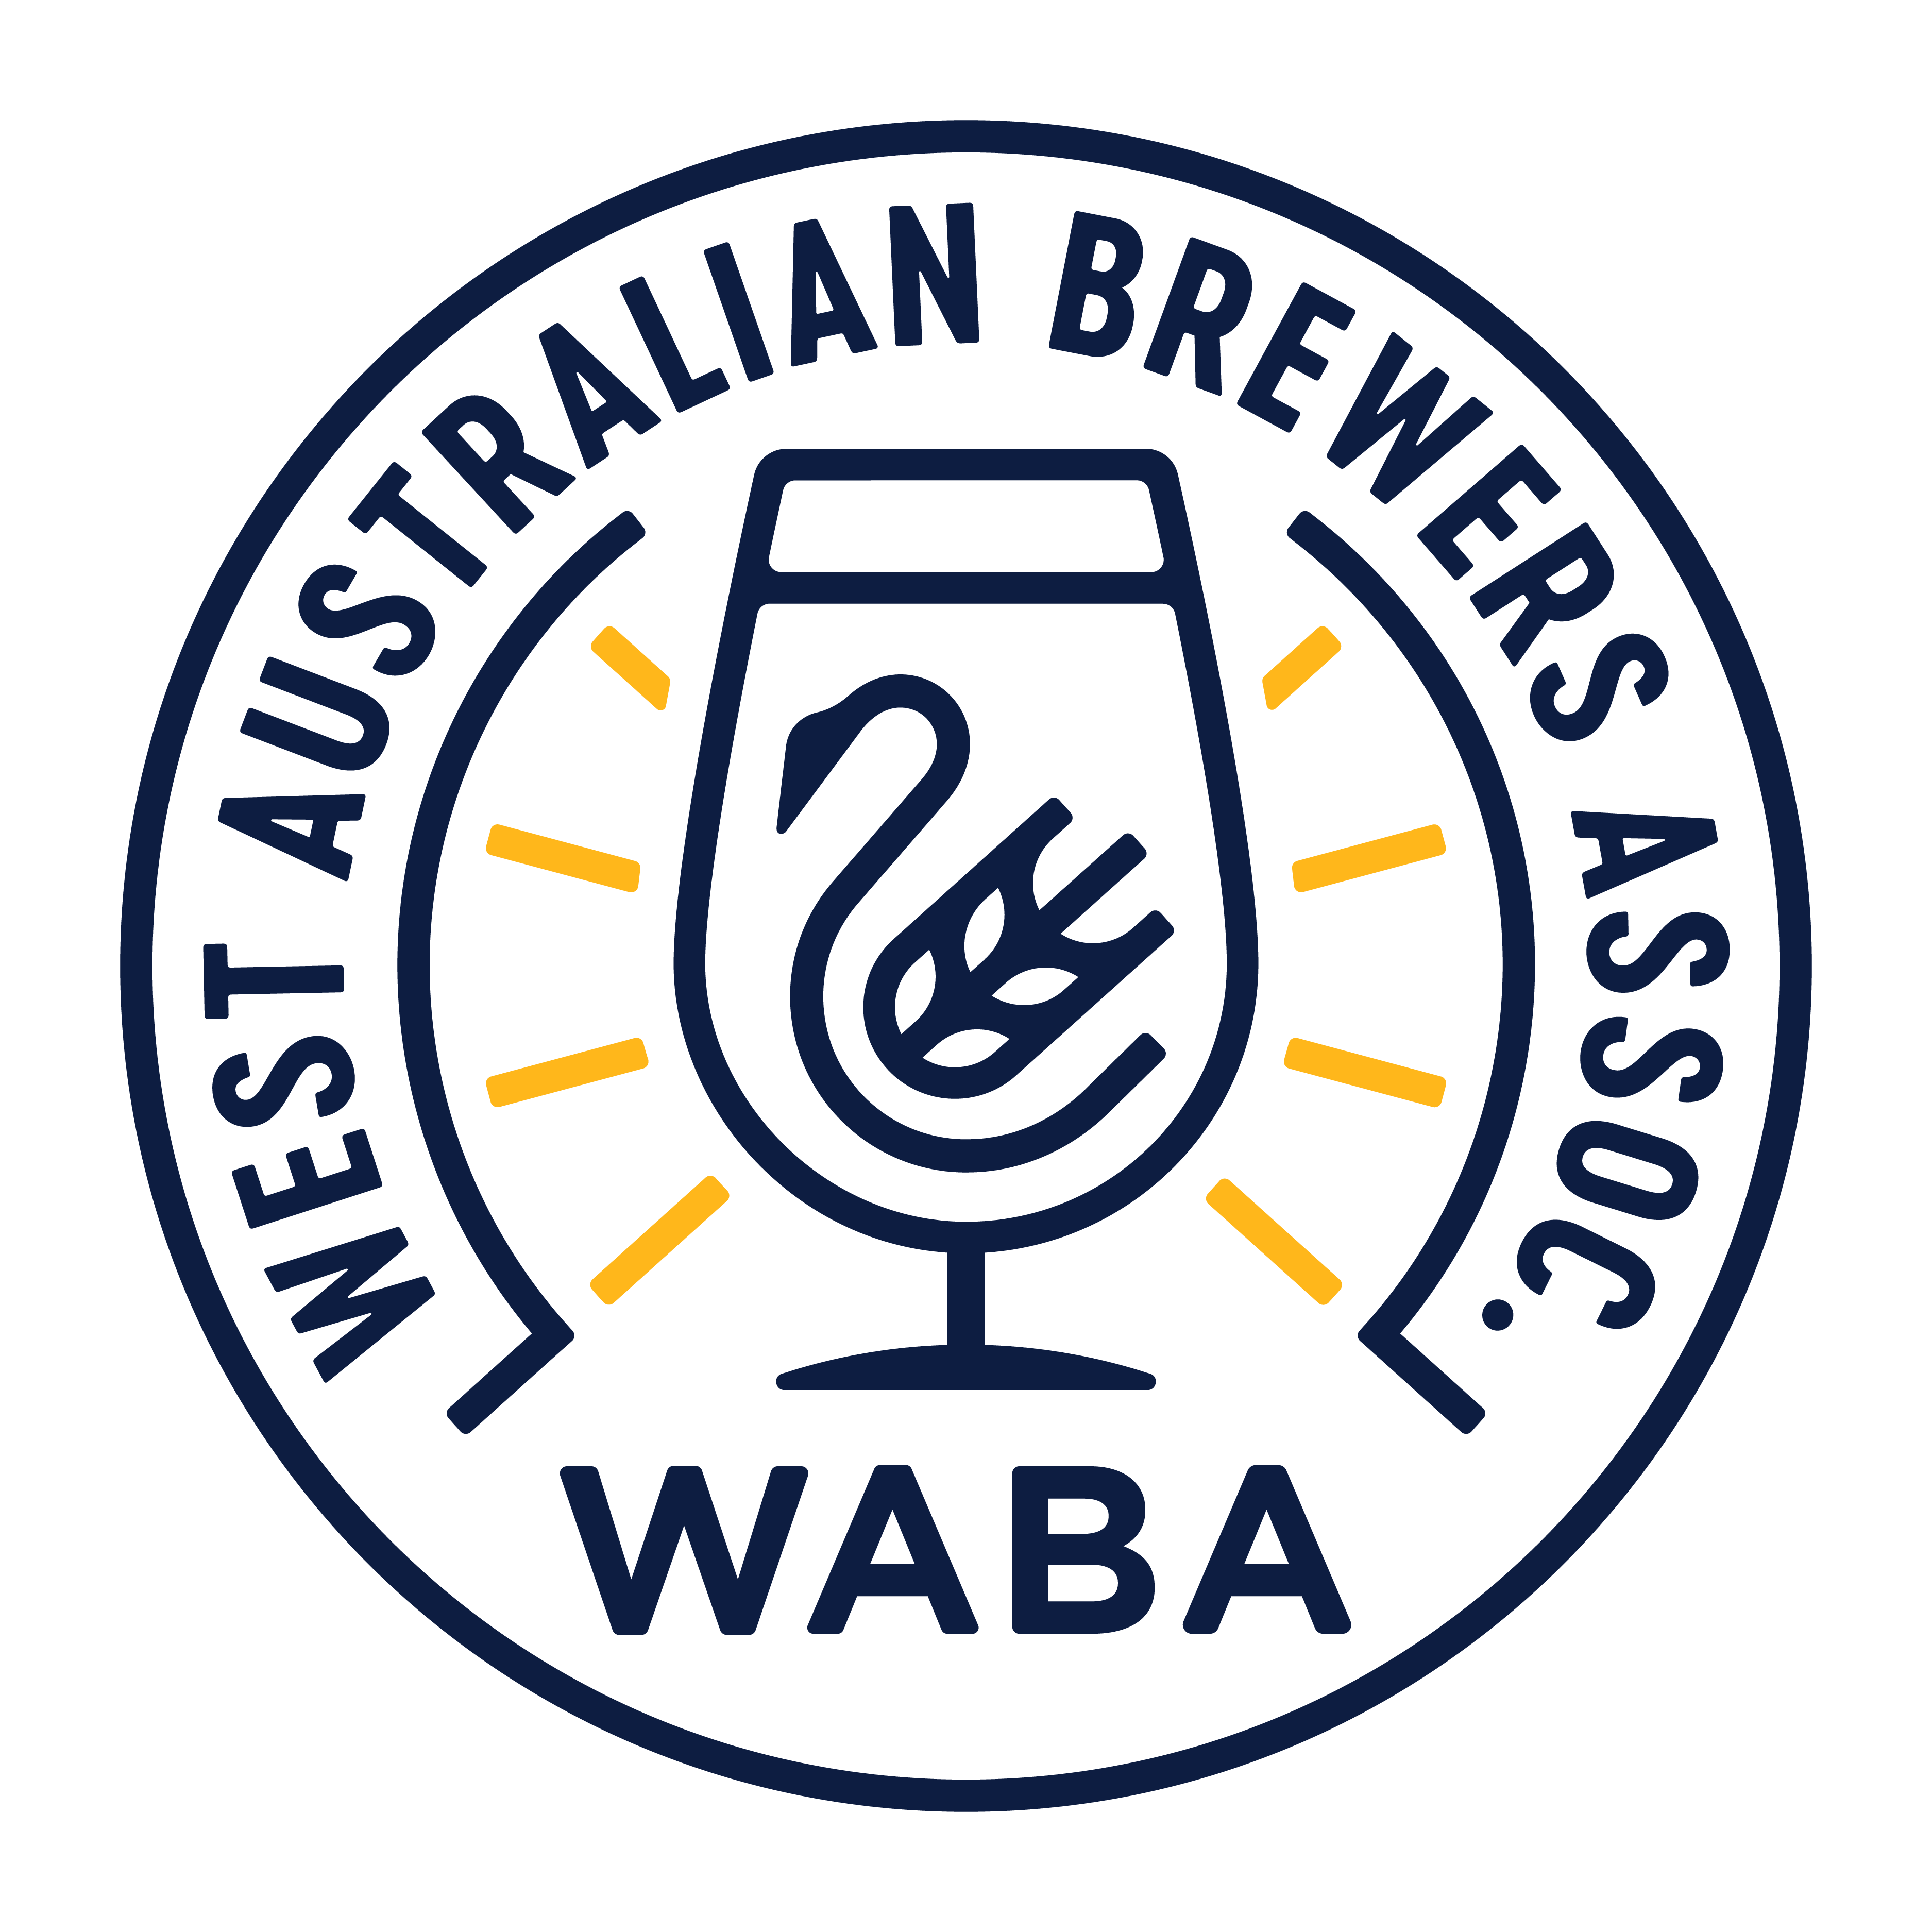 WABA logo design by logo designer Zendoke for your inspiration and for the worlds largest logo competition